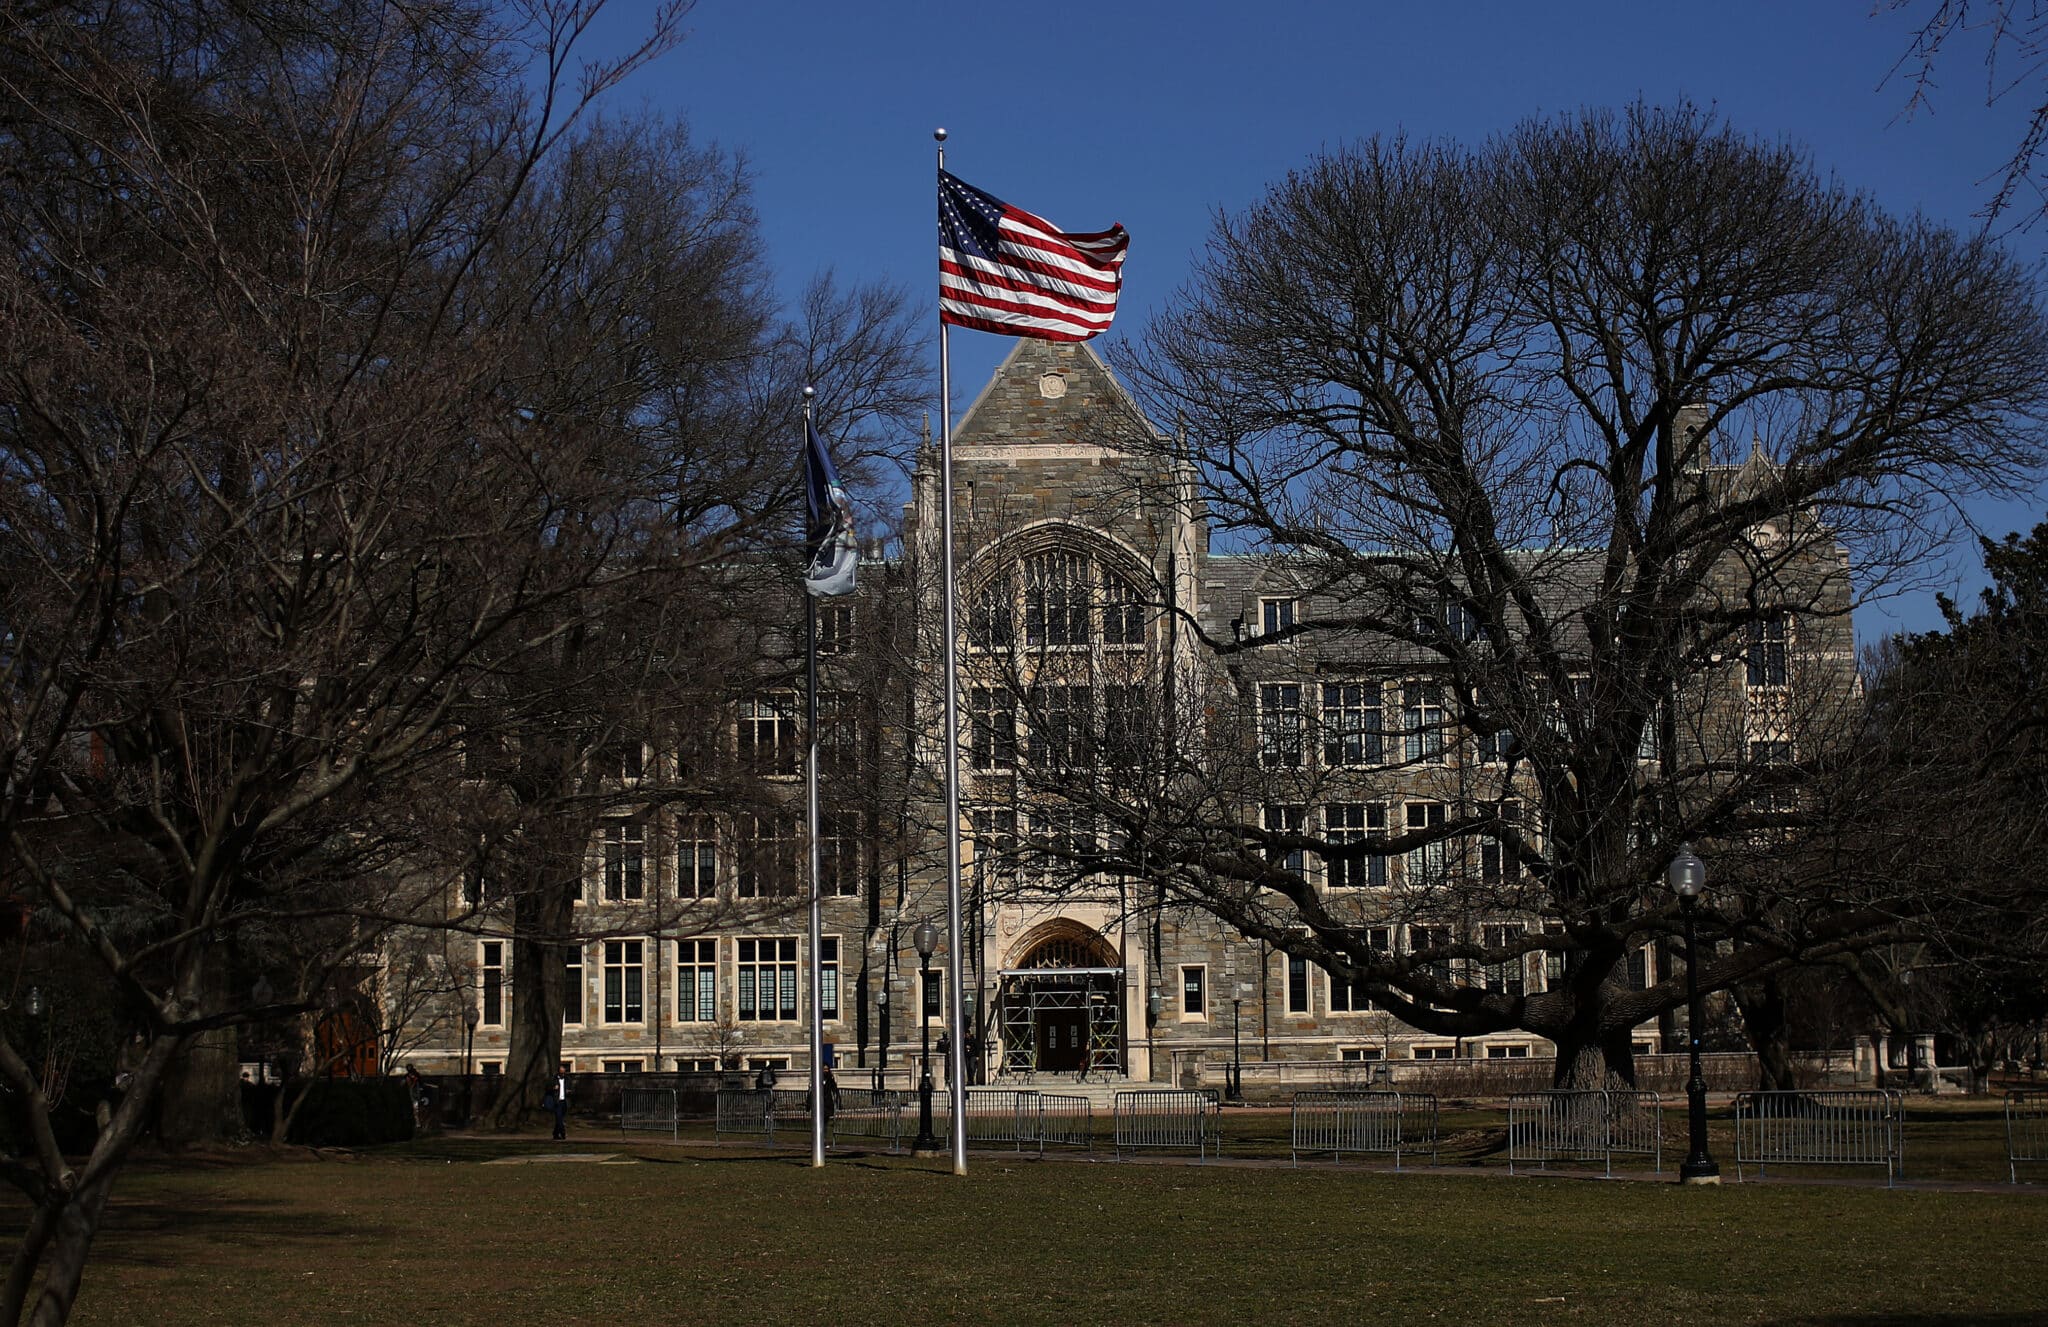 WASHINGTON,  - MARCH 12: The campus of Georgetown University is shown March 12, 2019 in Washington, DC. Georgetown University and several other schools including Yale, Stanford, the University of Texas, University of Southern California and UCLA were named today in an FBI investigation targeting 50 people as part of a bribery scheme to accept students with lower test scores into some of the leading universities across the United States. (Photo by Win McNamee/Getty Images)